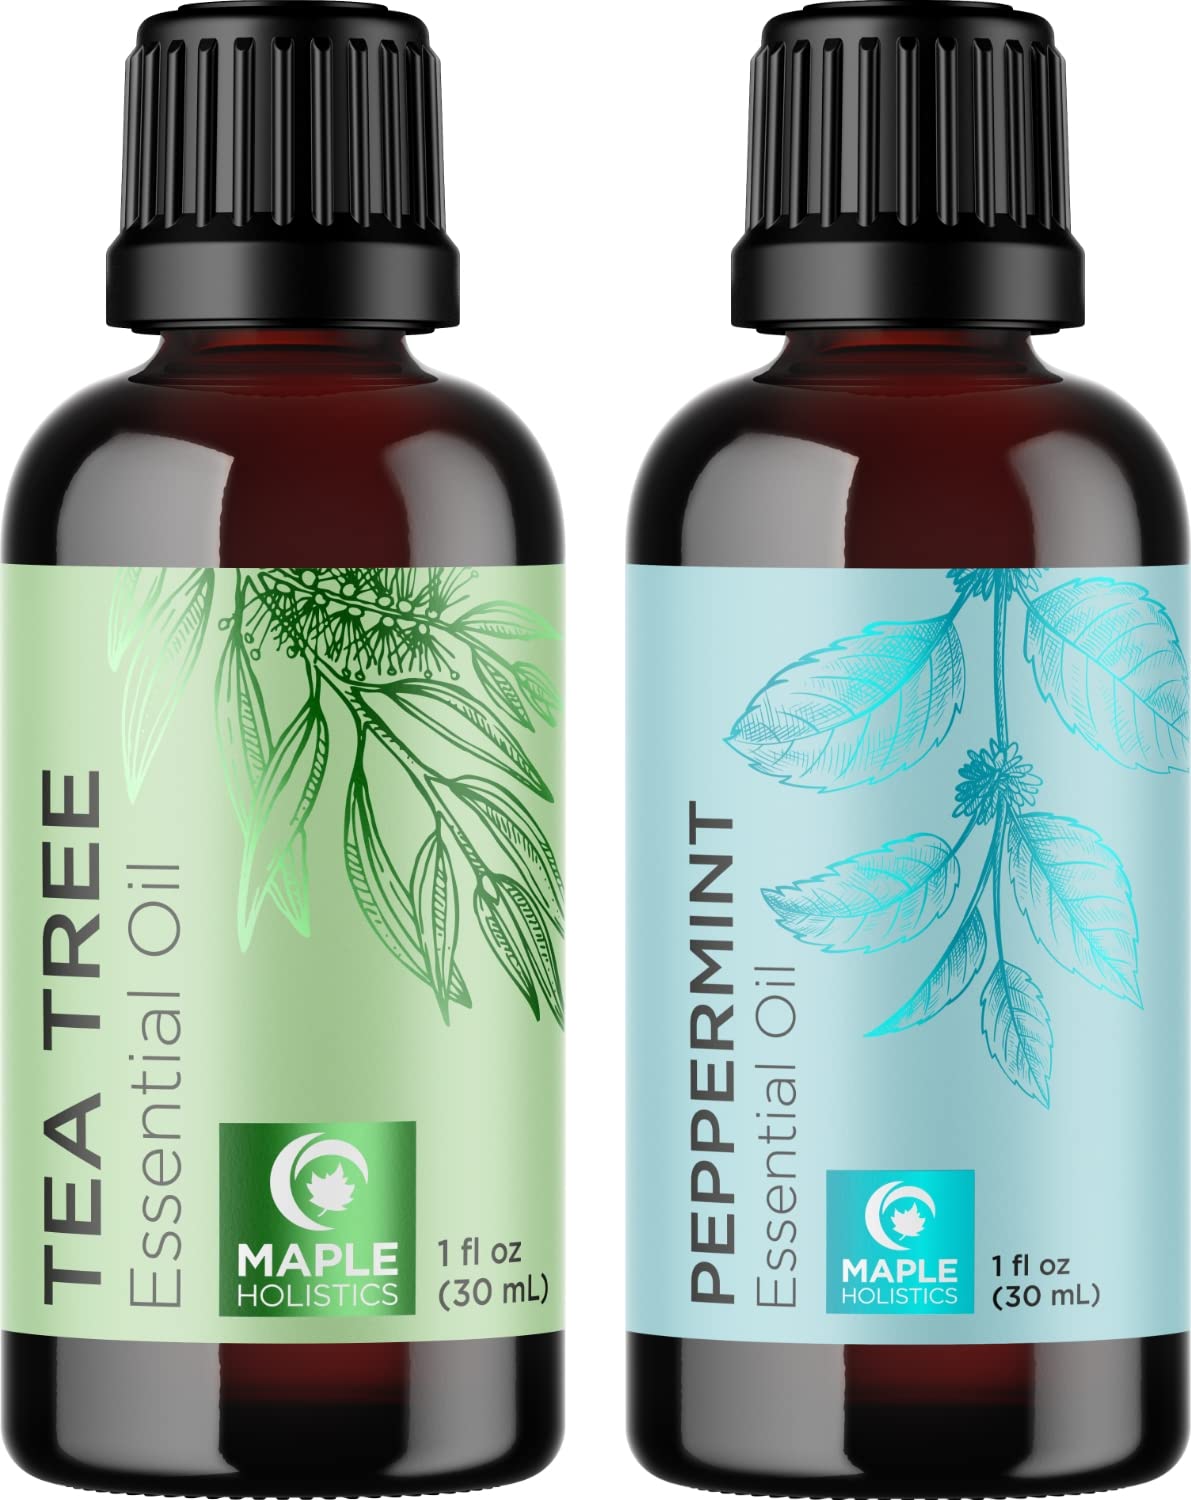 Premium Hair Oils for Hair and Skin - Pure Peppermint and Tea Tree Oil for Hair Growth and Skin Care - Hair Treatment Oils Set with Tea Tree Essential Oil and Peppermint Essential Oil 1 Fl Oz Each